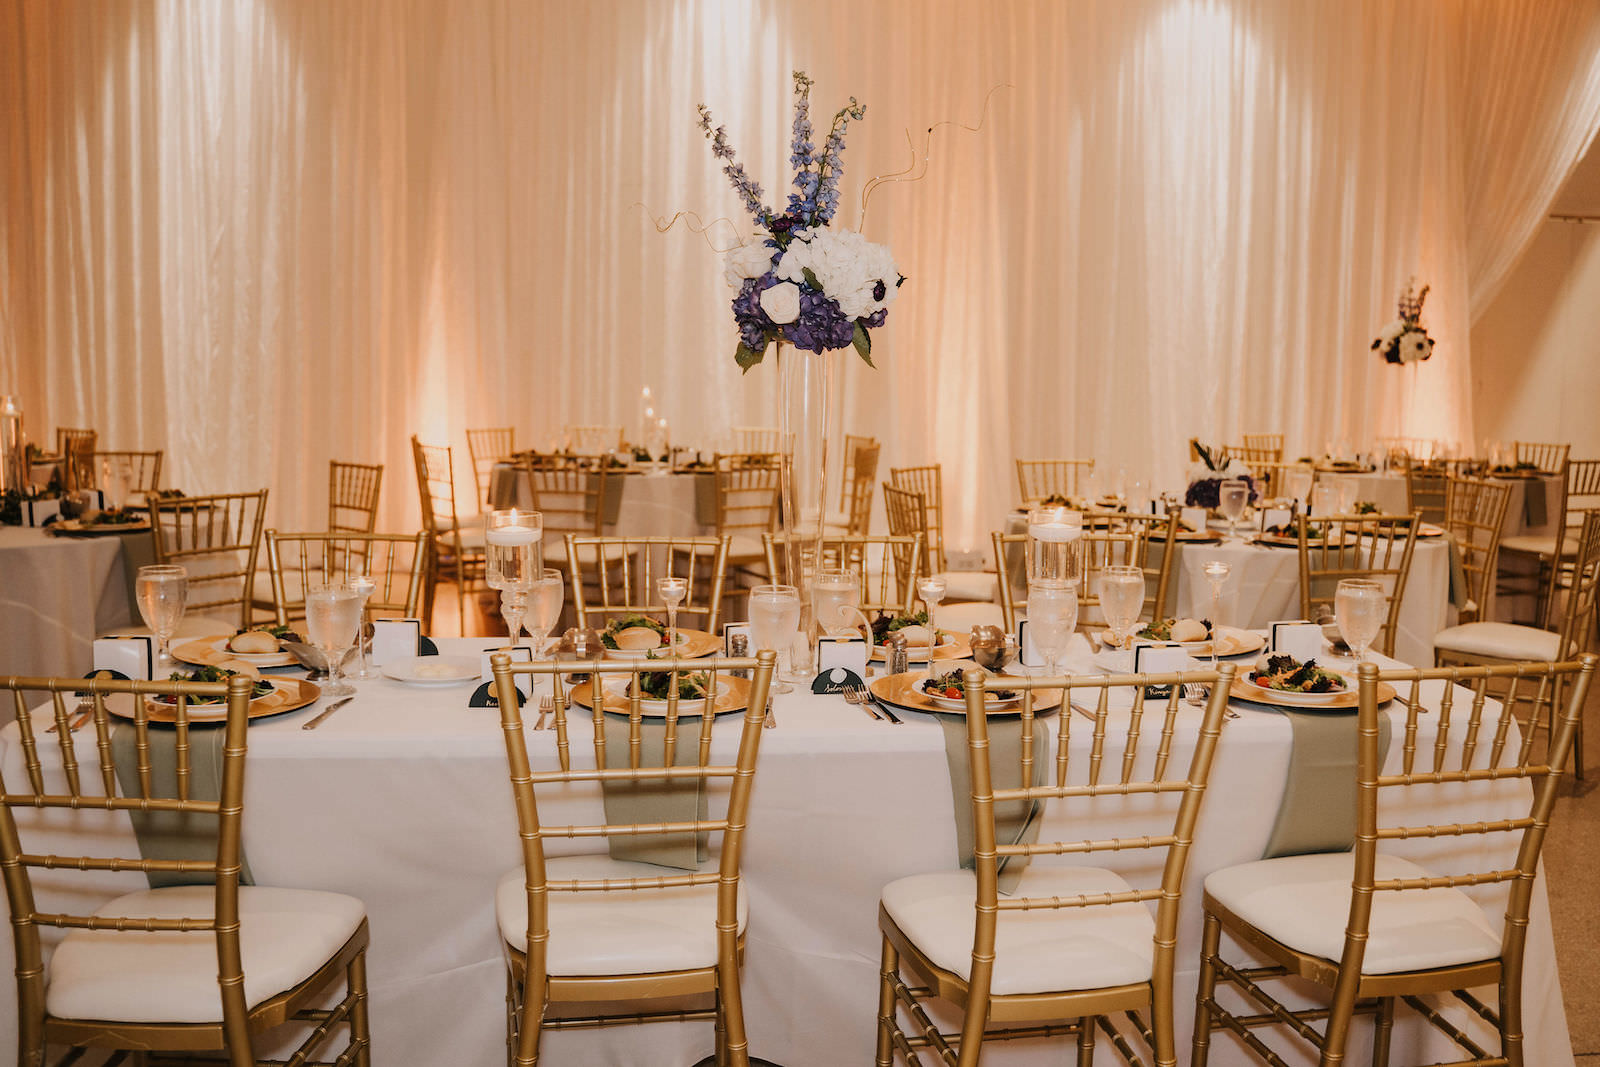 Tampa Wedding Venue the Tampa Garden Club Indoor Reception | Pipe and Drape with Uplights | Reception Tables with White Linens and Gold Chiavari Chairs and Gold Charger Plates with Tall Clear Vase Centerpieces of Purple and White Hydrangea Roses and Stock Flowers